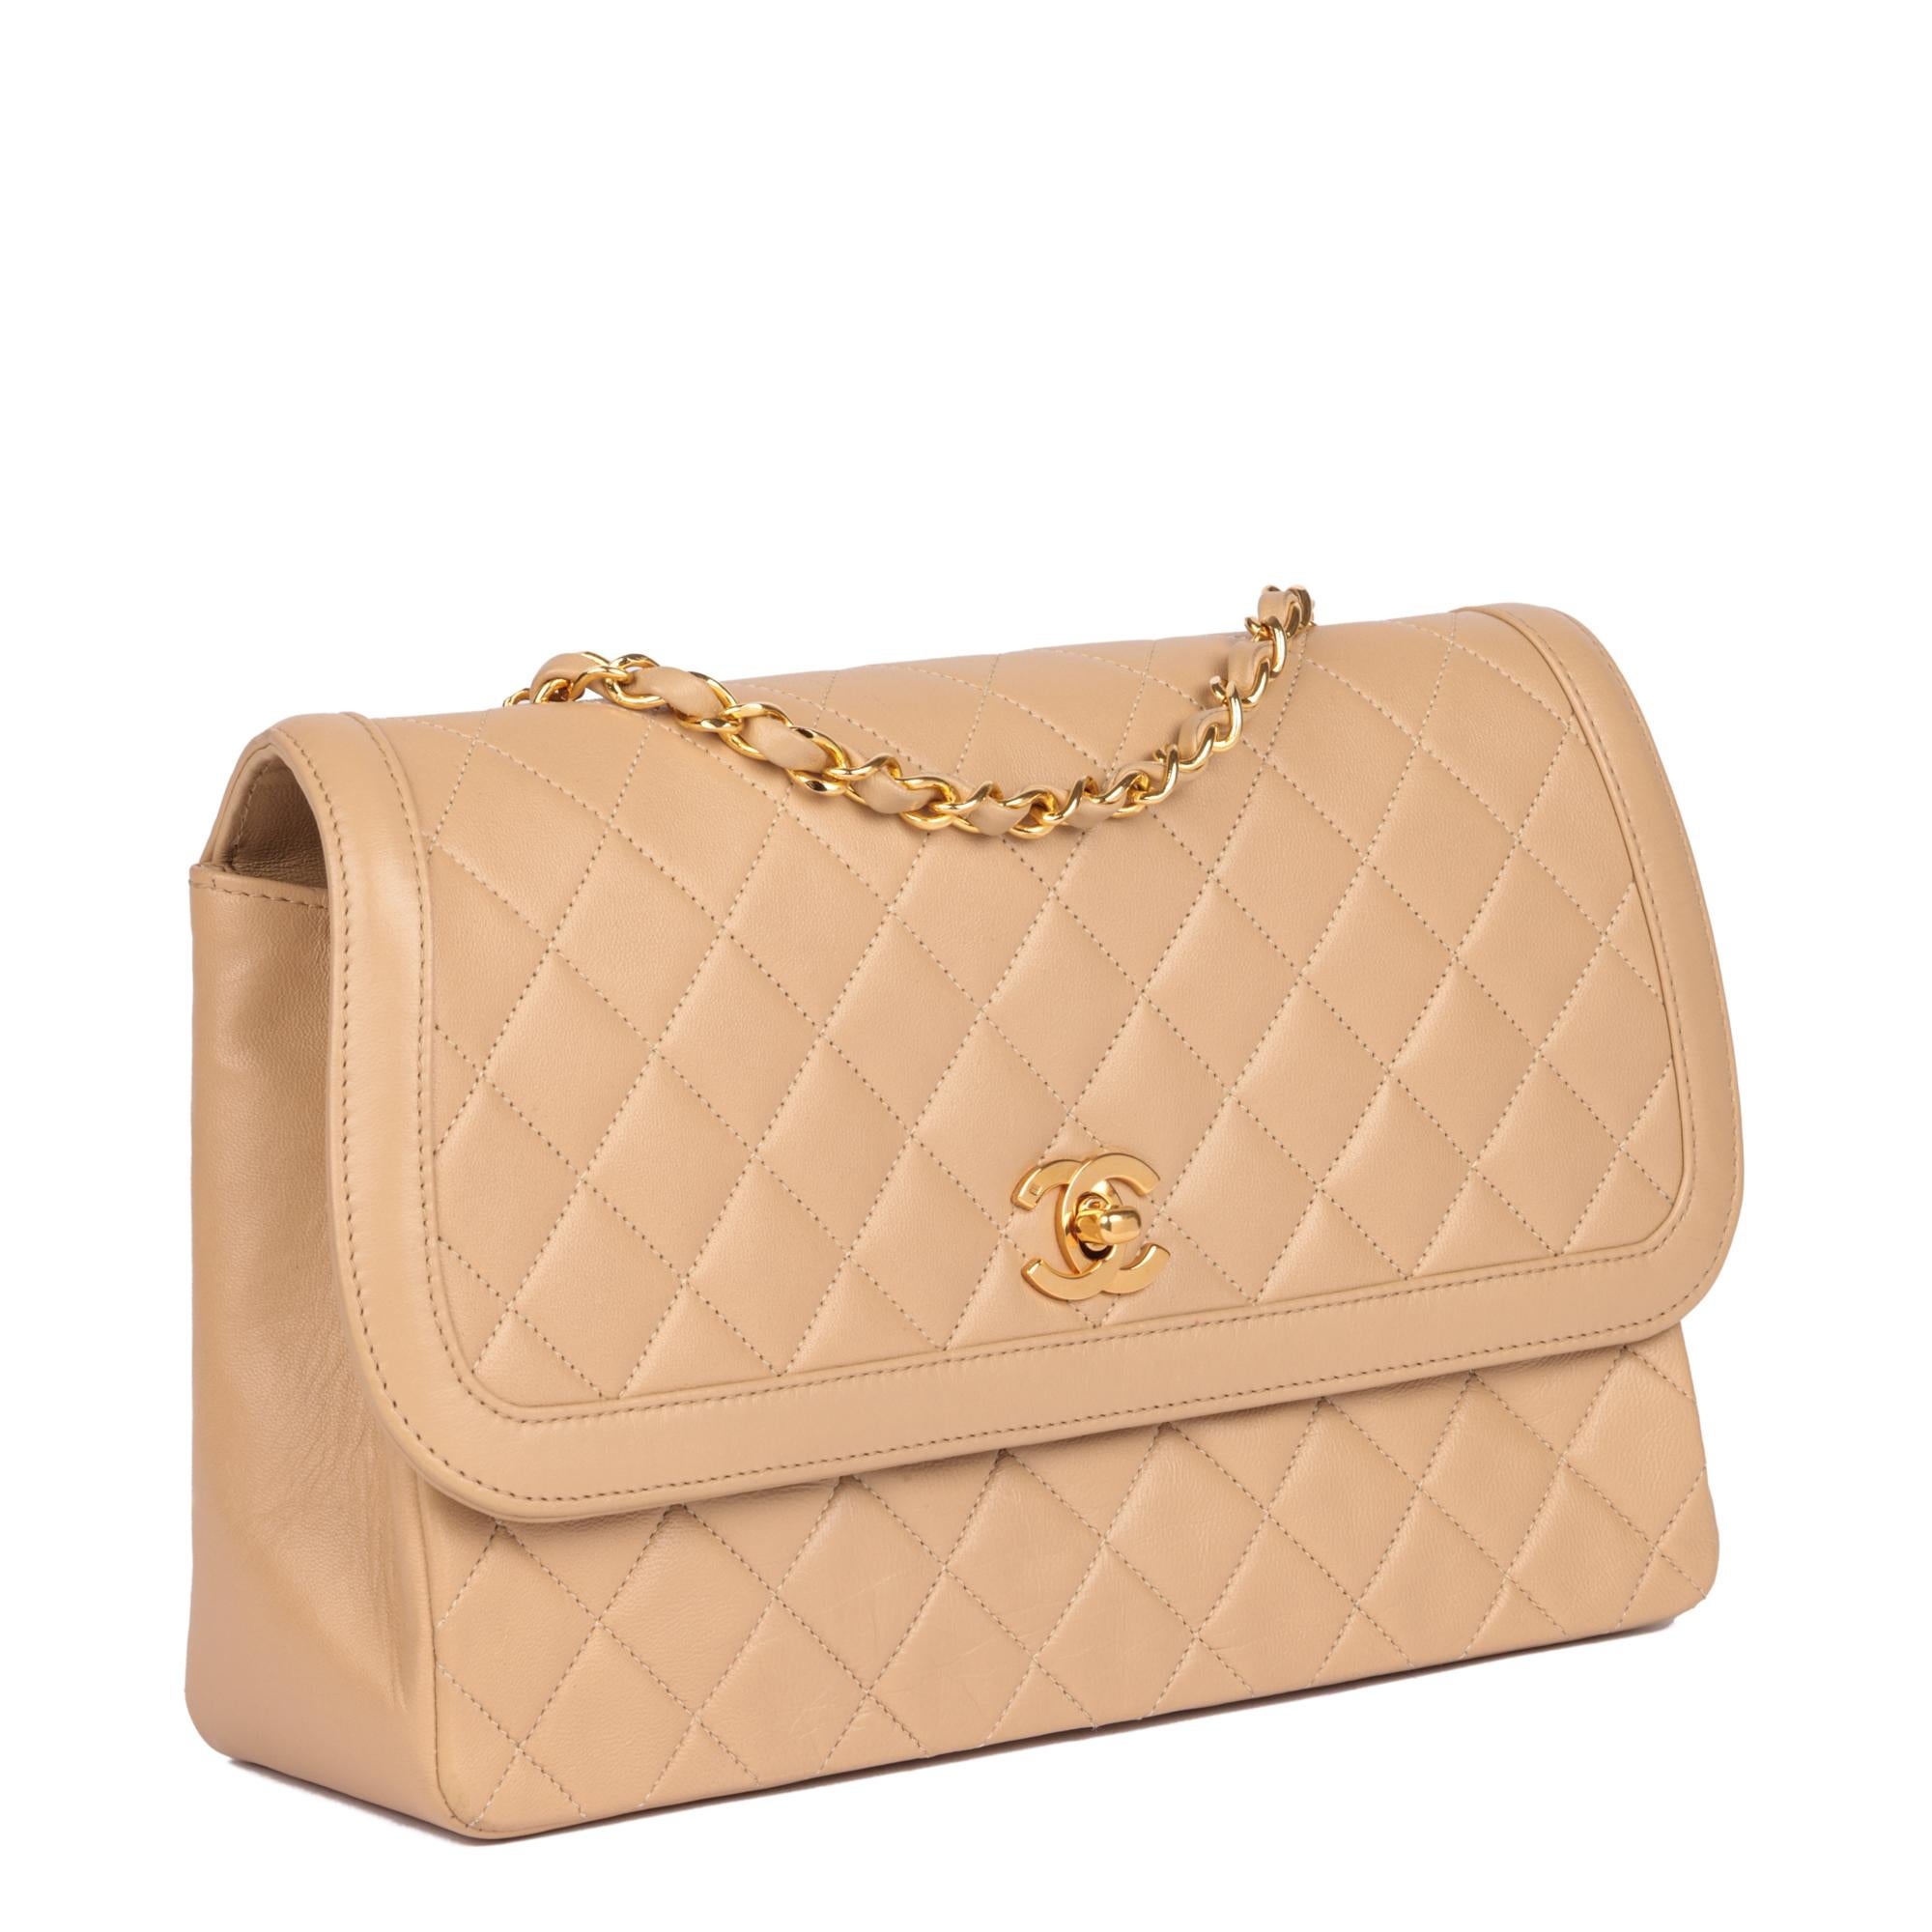 CHANEL
Beige Quilted Lambskin Vintage Medium Classic Single Flap Bag with Wallet

Xupes Reference: HB5243
Serial Number: 1488135
Age (Circa): 1990
Accompanied By: Chanel Dust Bag, Wallet
Authenticity Details: Authenticity Card, Serial Sticker (Made